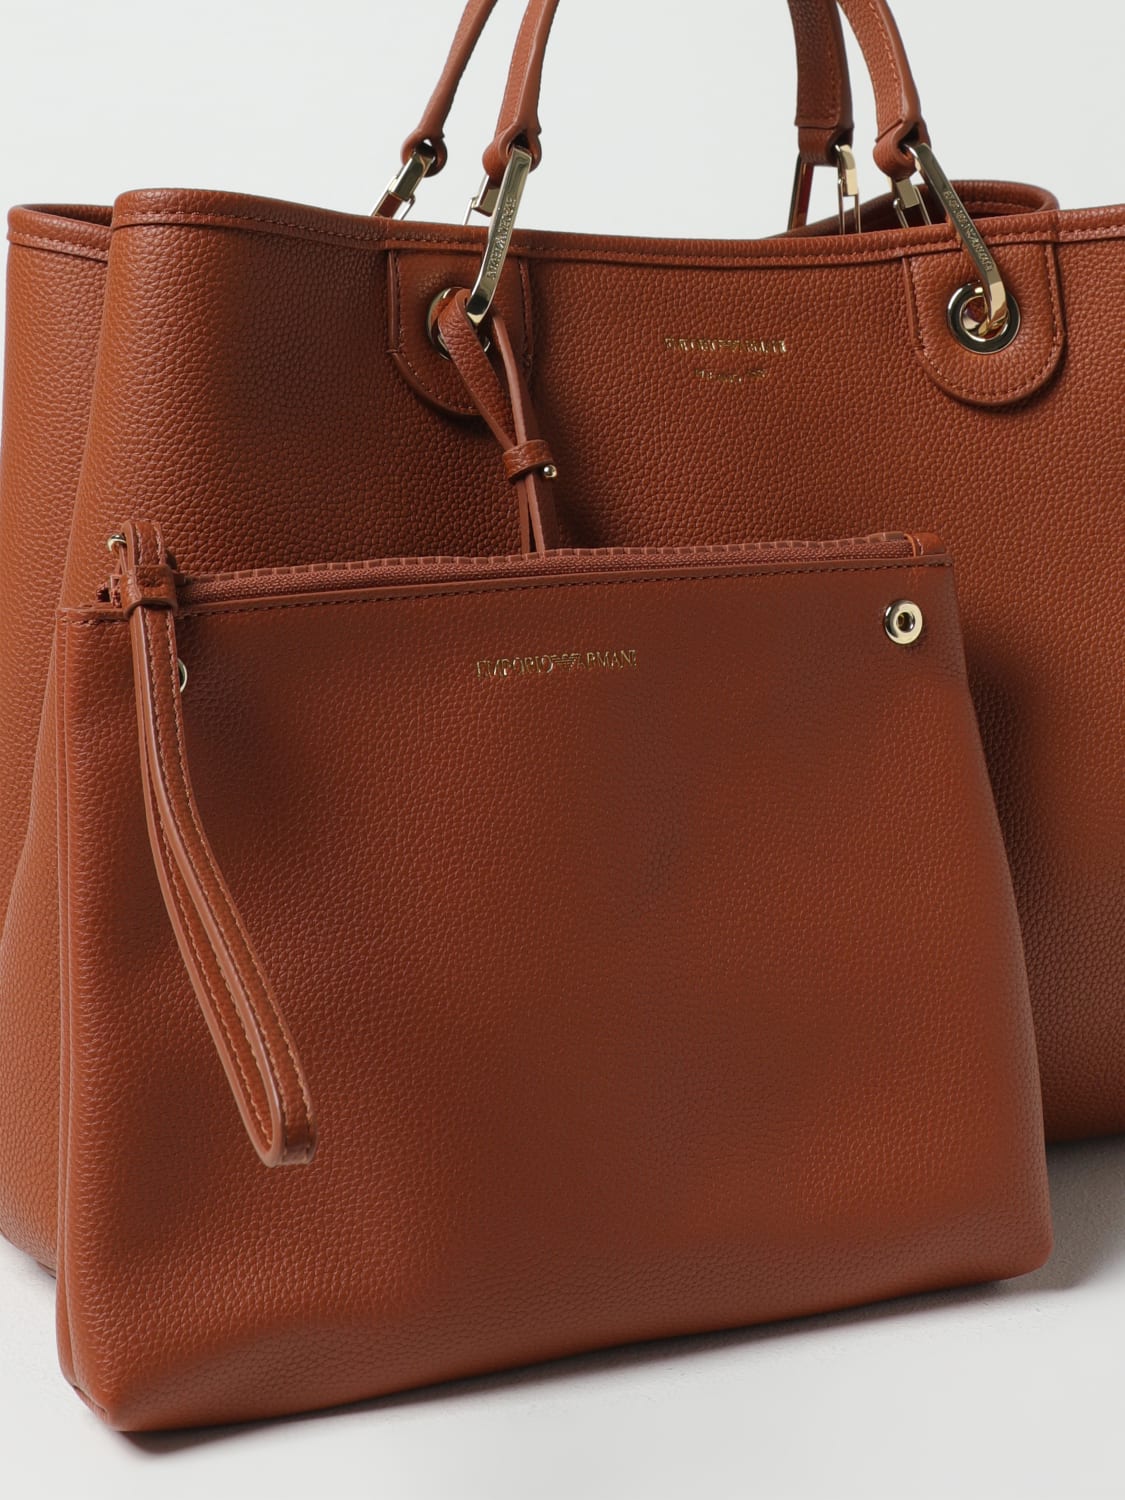 Emporio Armani Bag In Grained Synthetic Leather in Brown